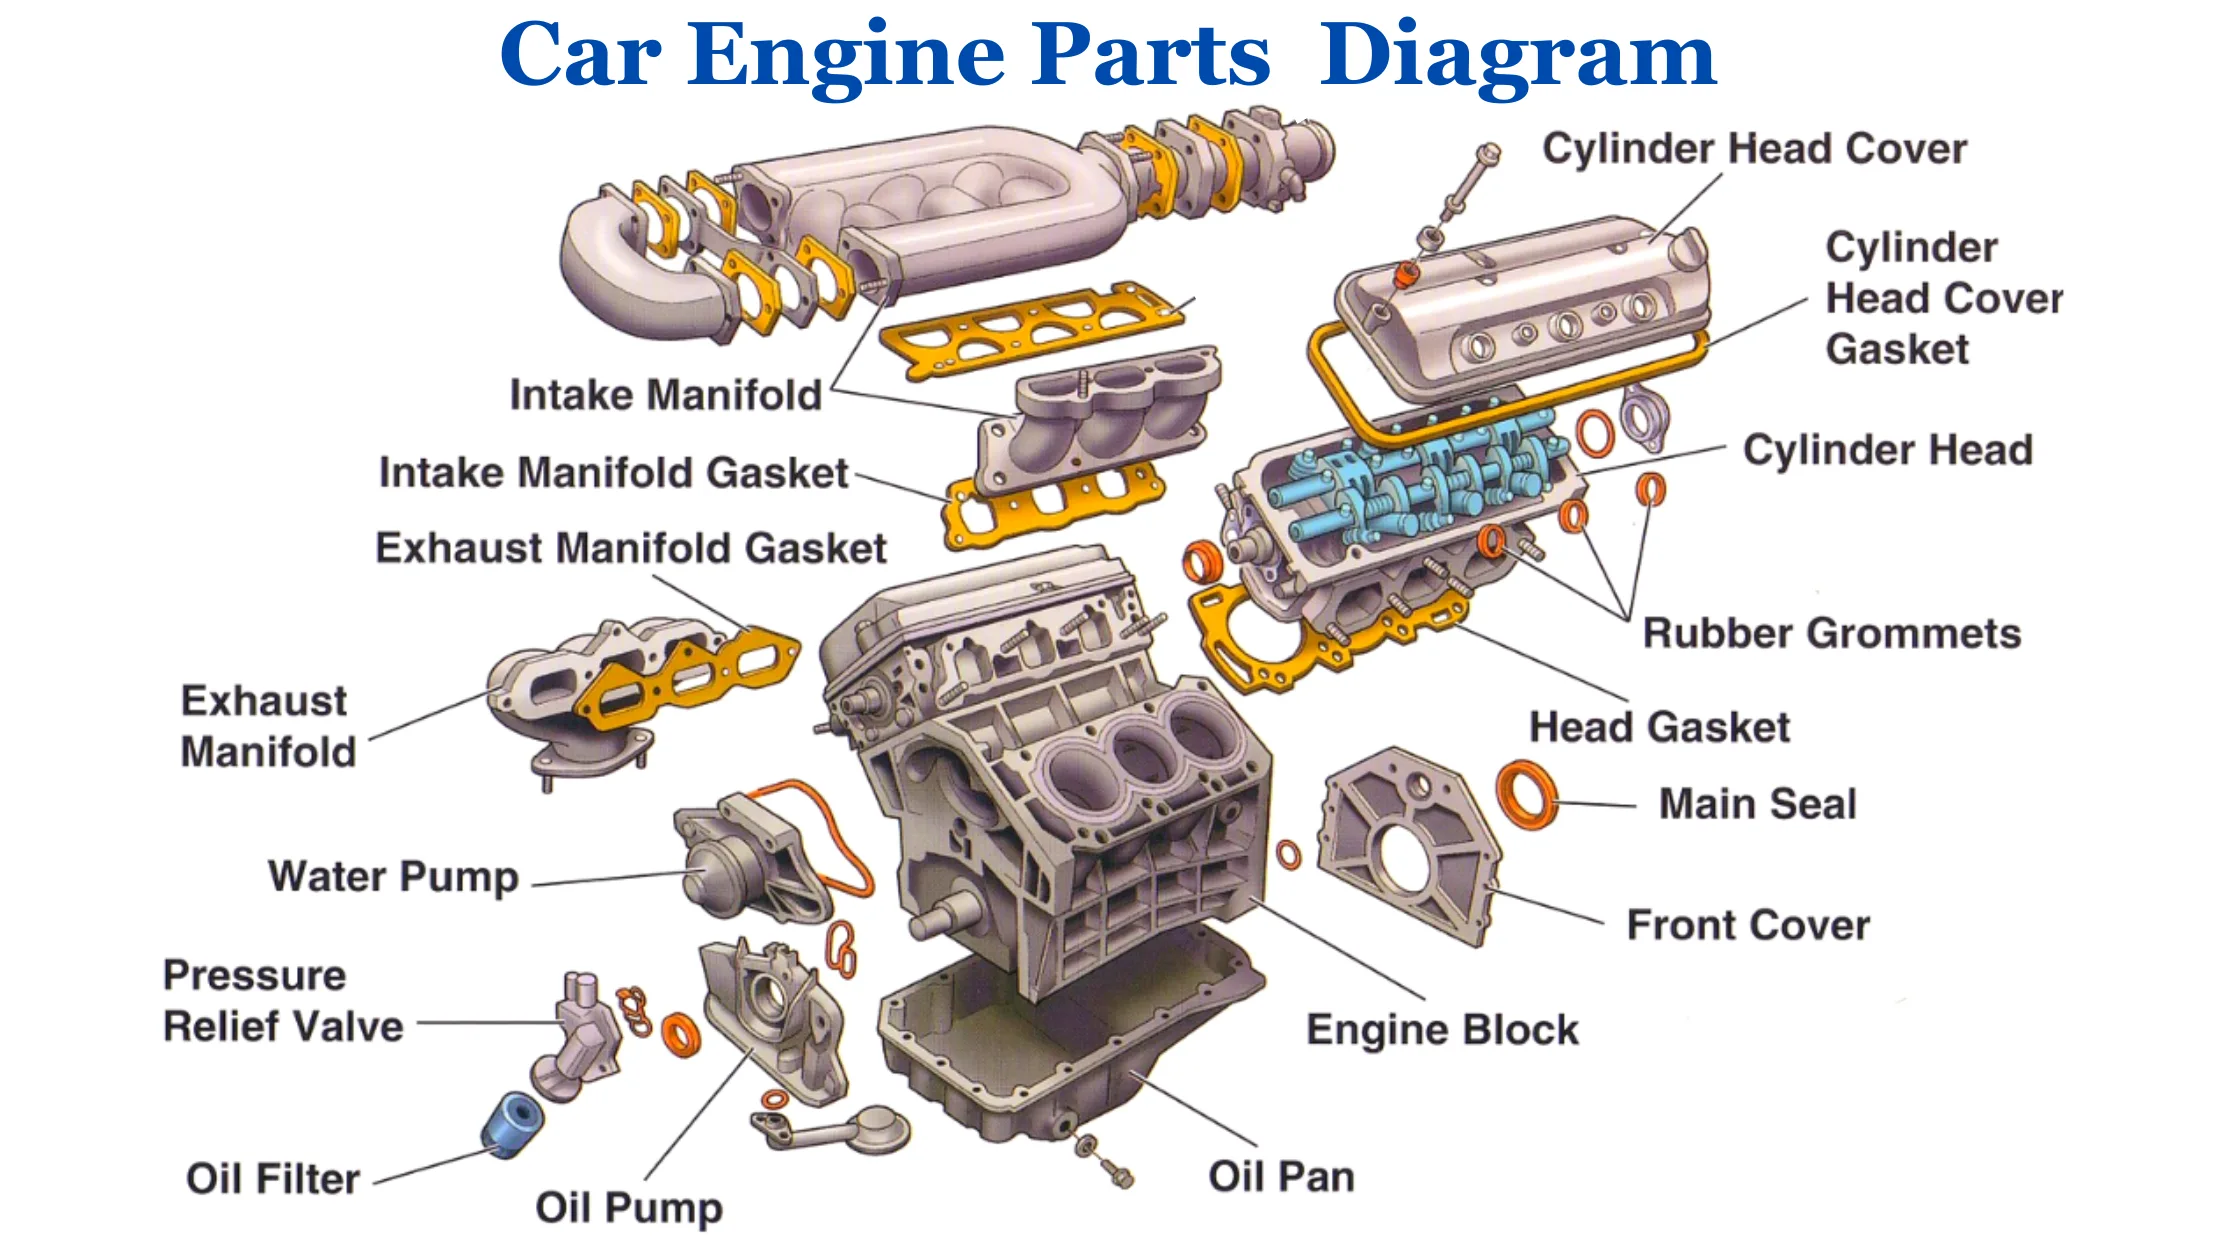 30 Basic Parts of a Car Engine with Diagram